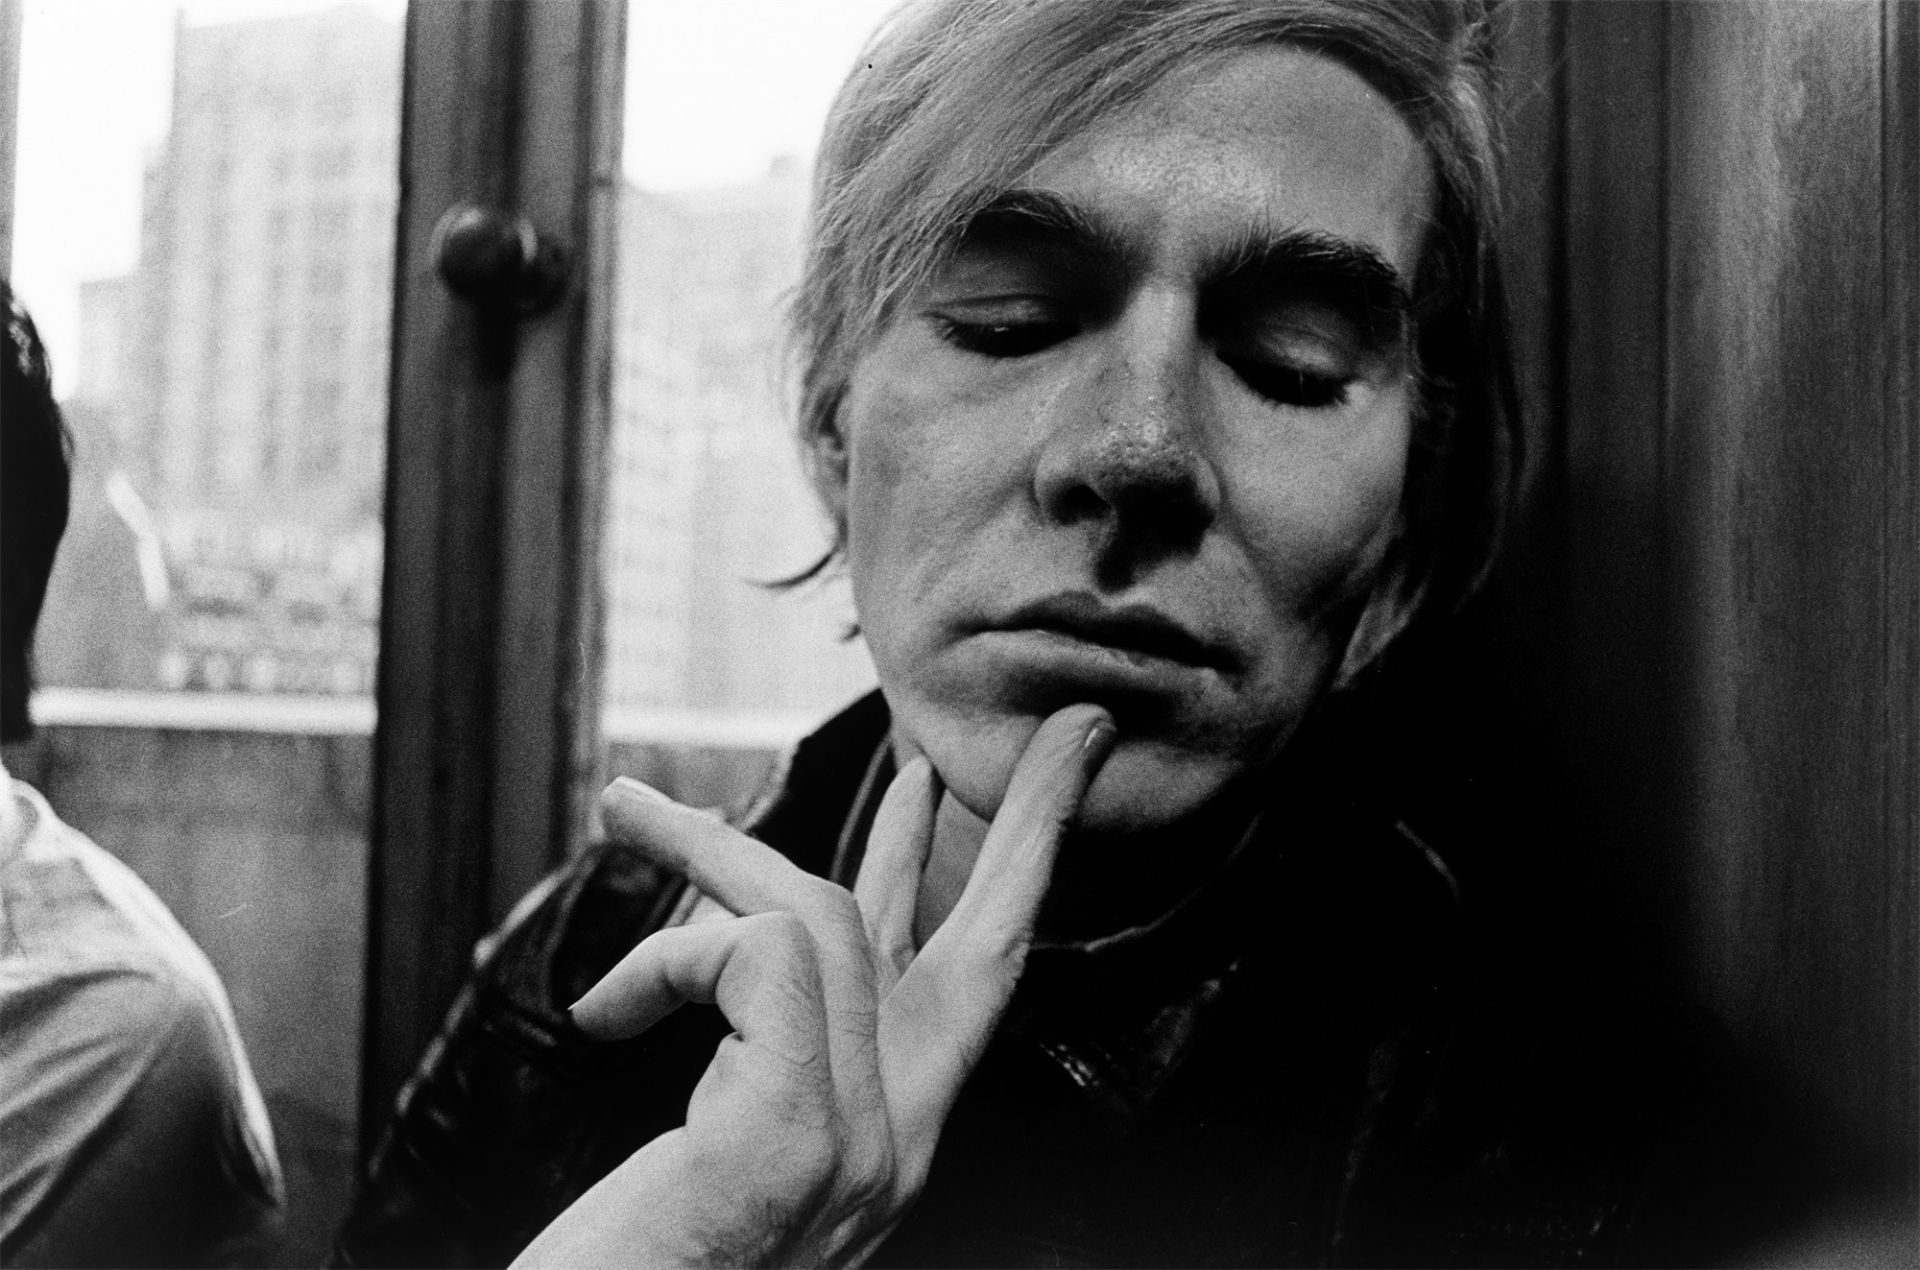 Will McBride. „Andy Warhol in der 'Factory', Union Square, New York“. 1970